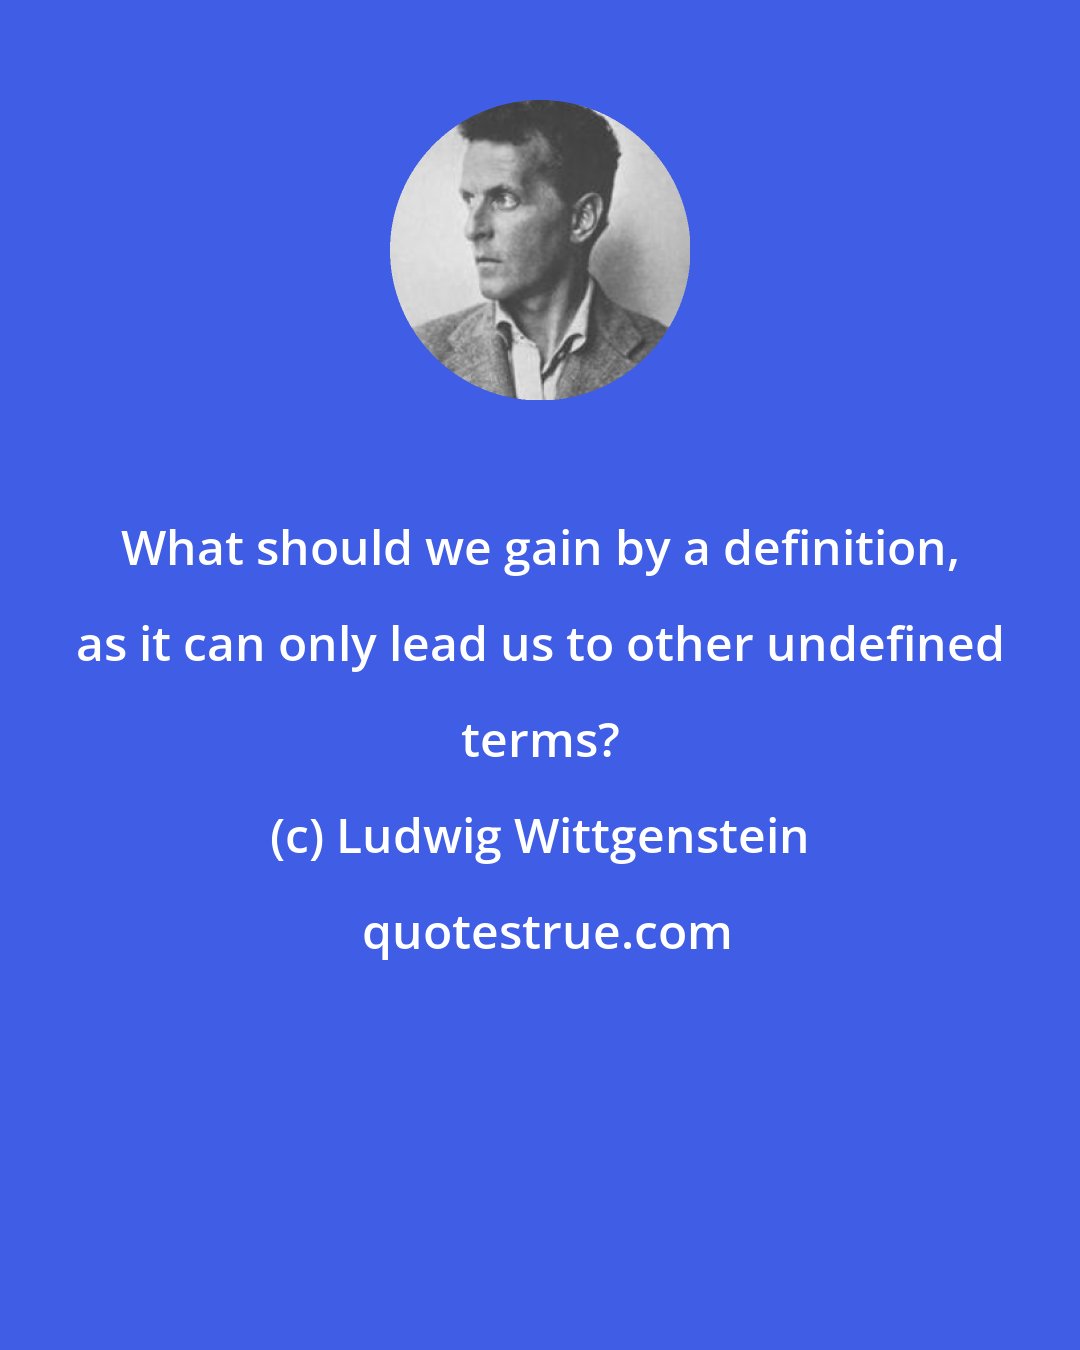 Ludwig Wittgenstein: What should we gain by a definition, as it can only lead us to other undefined terms?